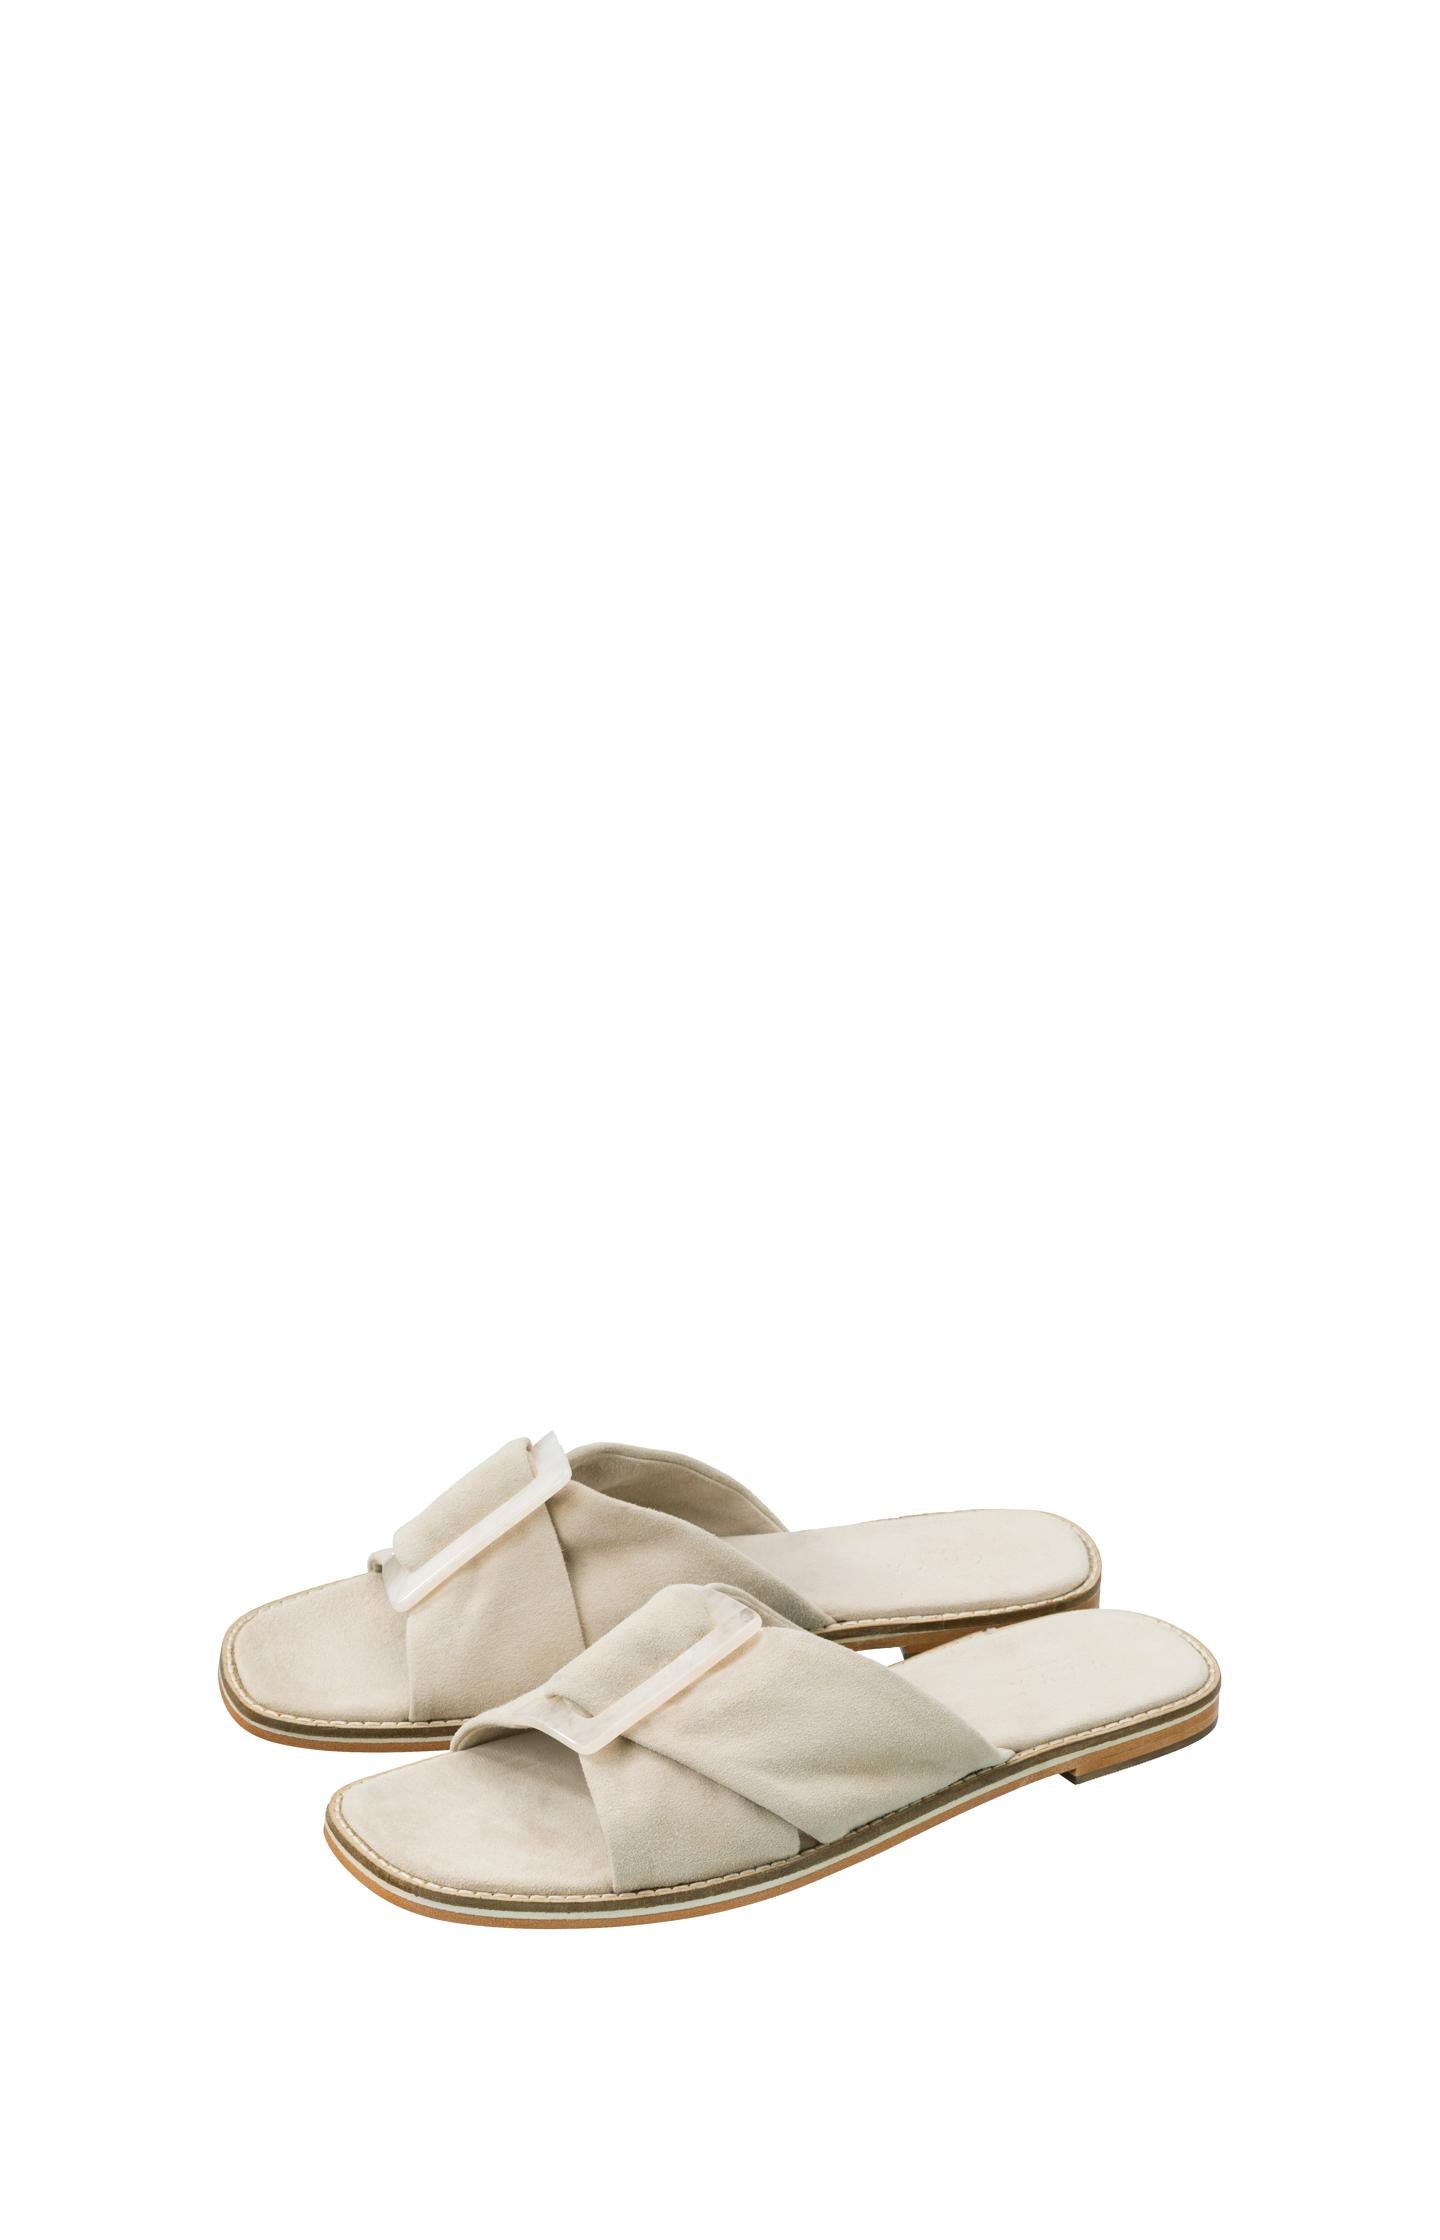 Suede slipper with buckle and crossed straps - Safari Sand - Type: product